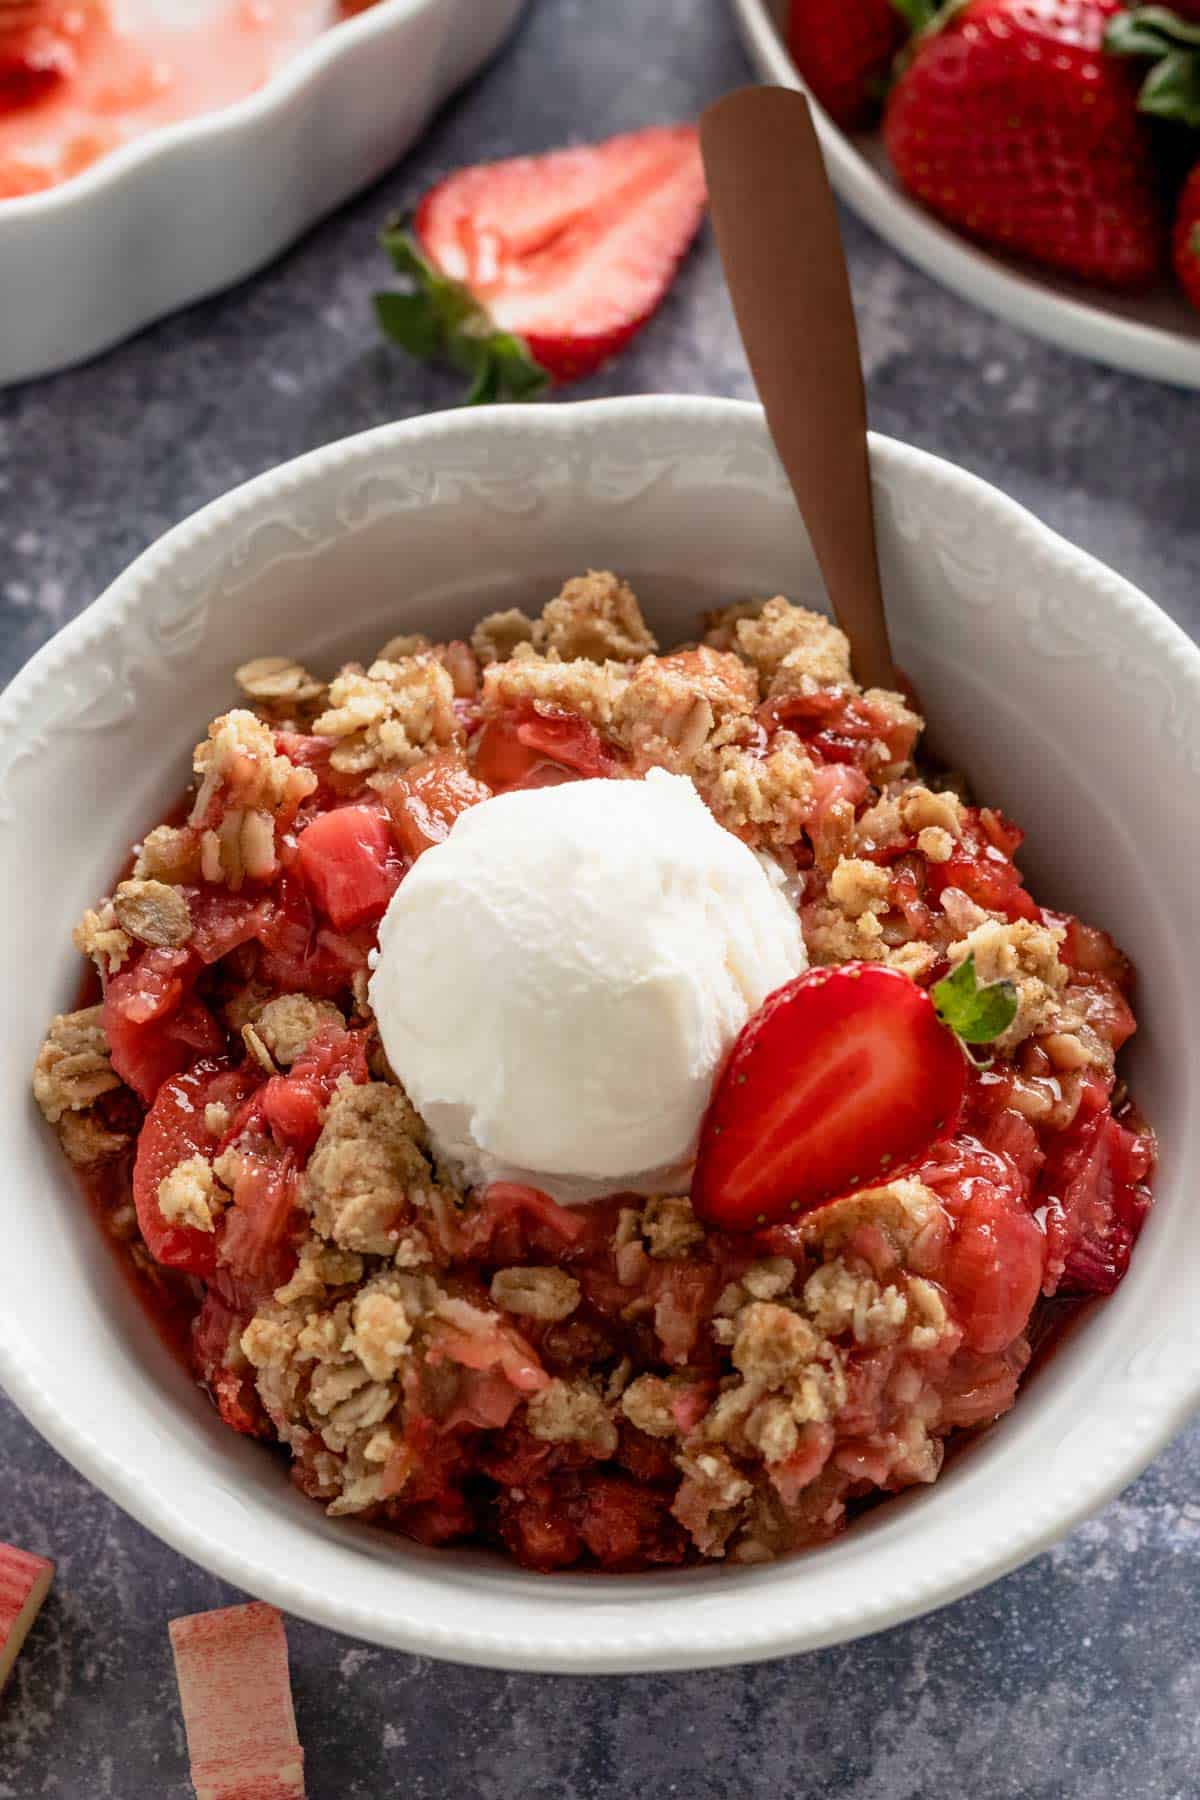 Strawberry Rhubarb Crisp in a bowl and ice cream